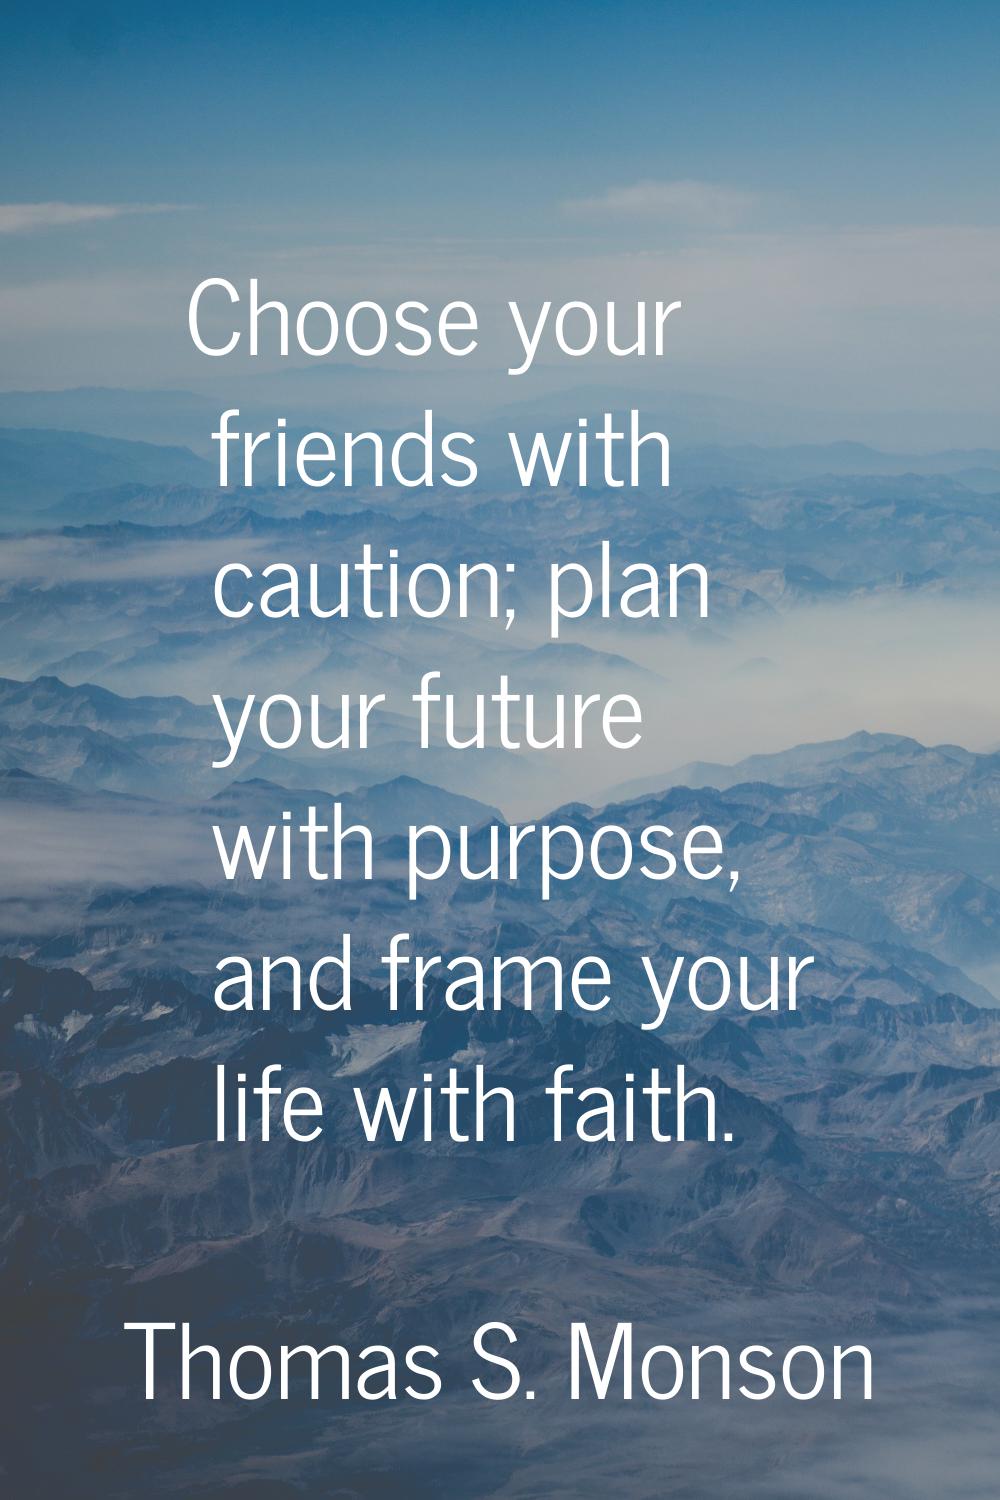 Choose your friends with caution; plan your future with purpose, and frame your life with faith.